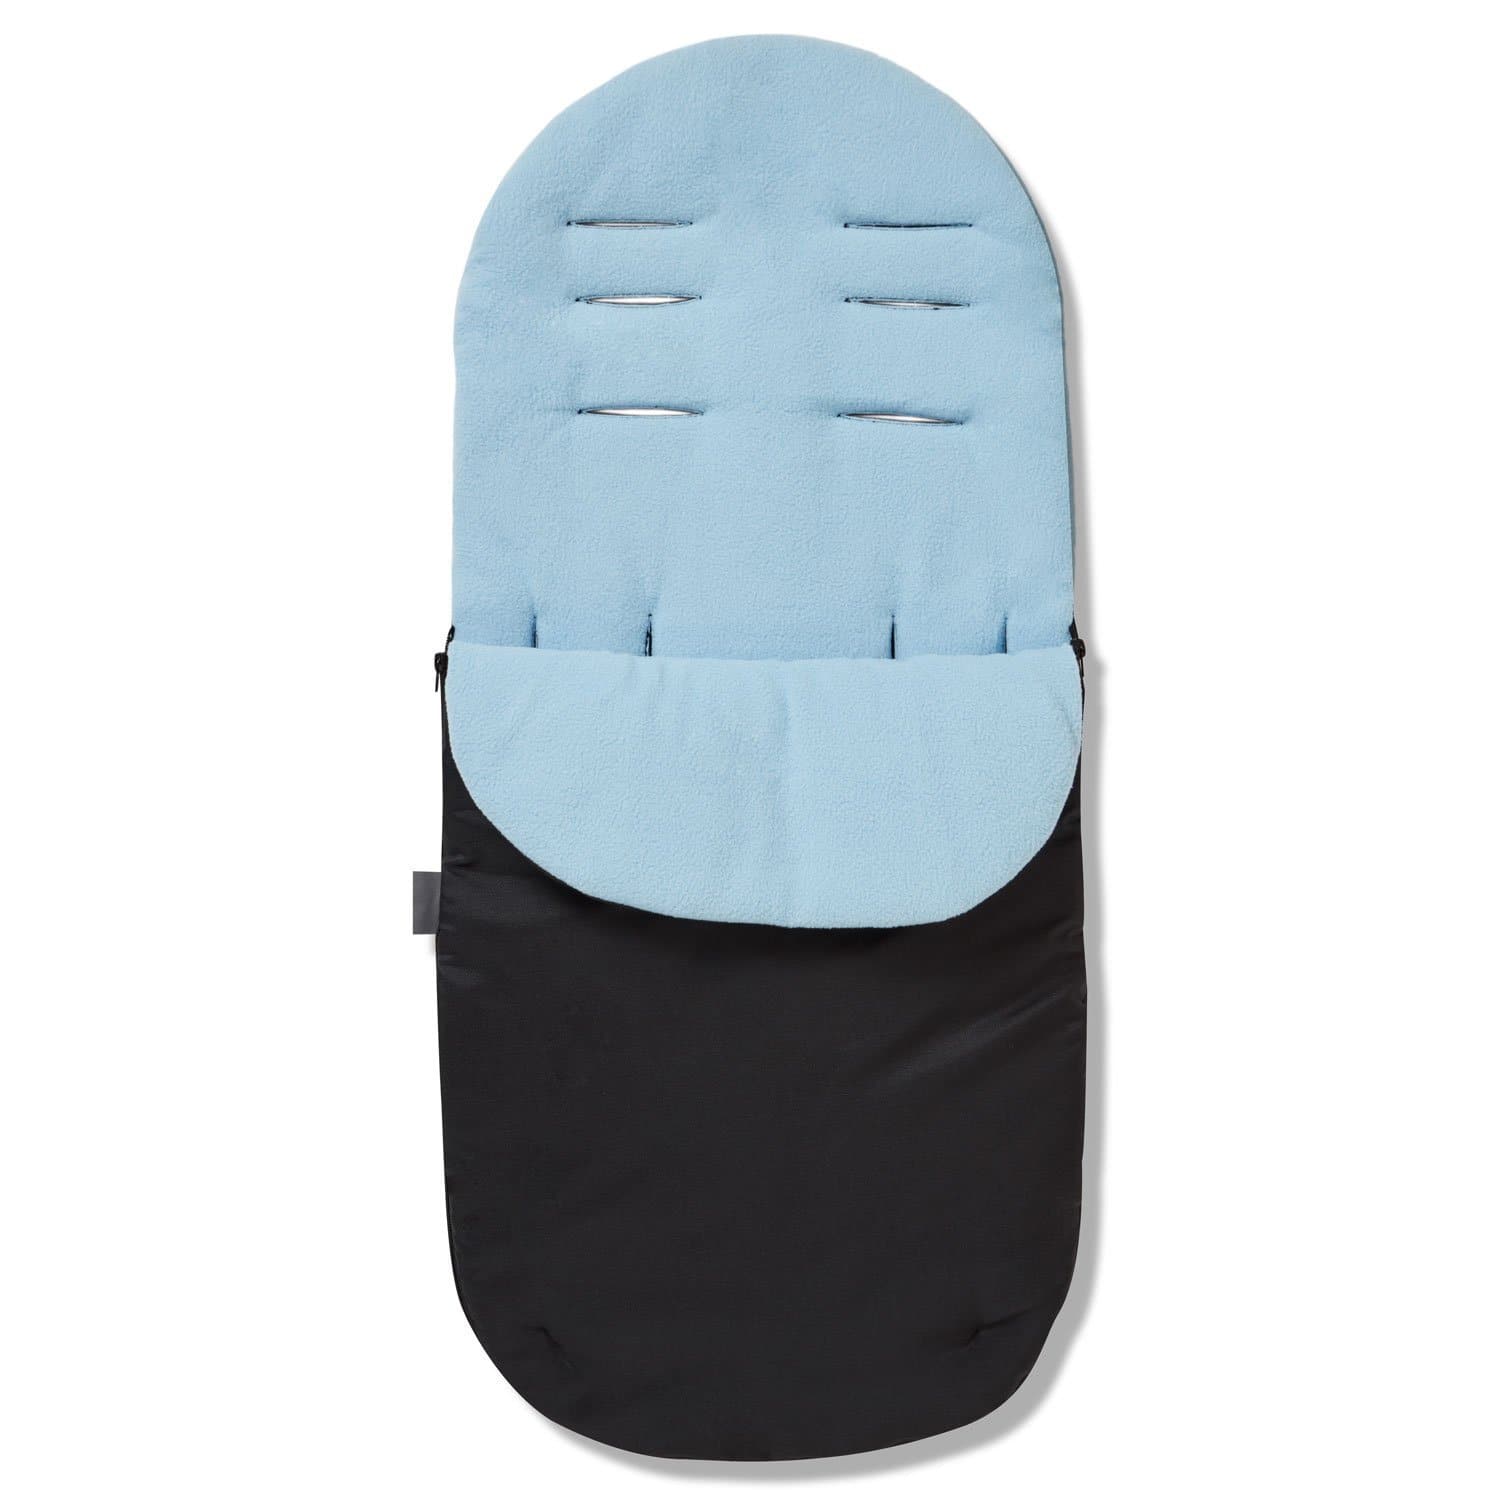 Footmuff / Cosy Toes Compatible with Excel - Light Blue / Fits All Models | For Your Little One